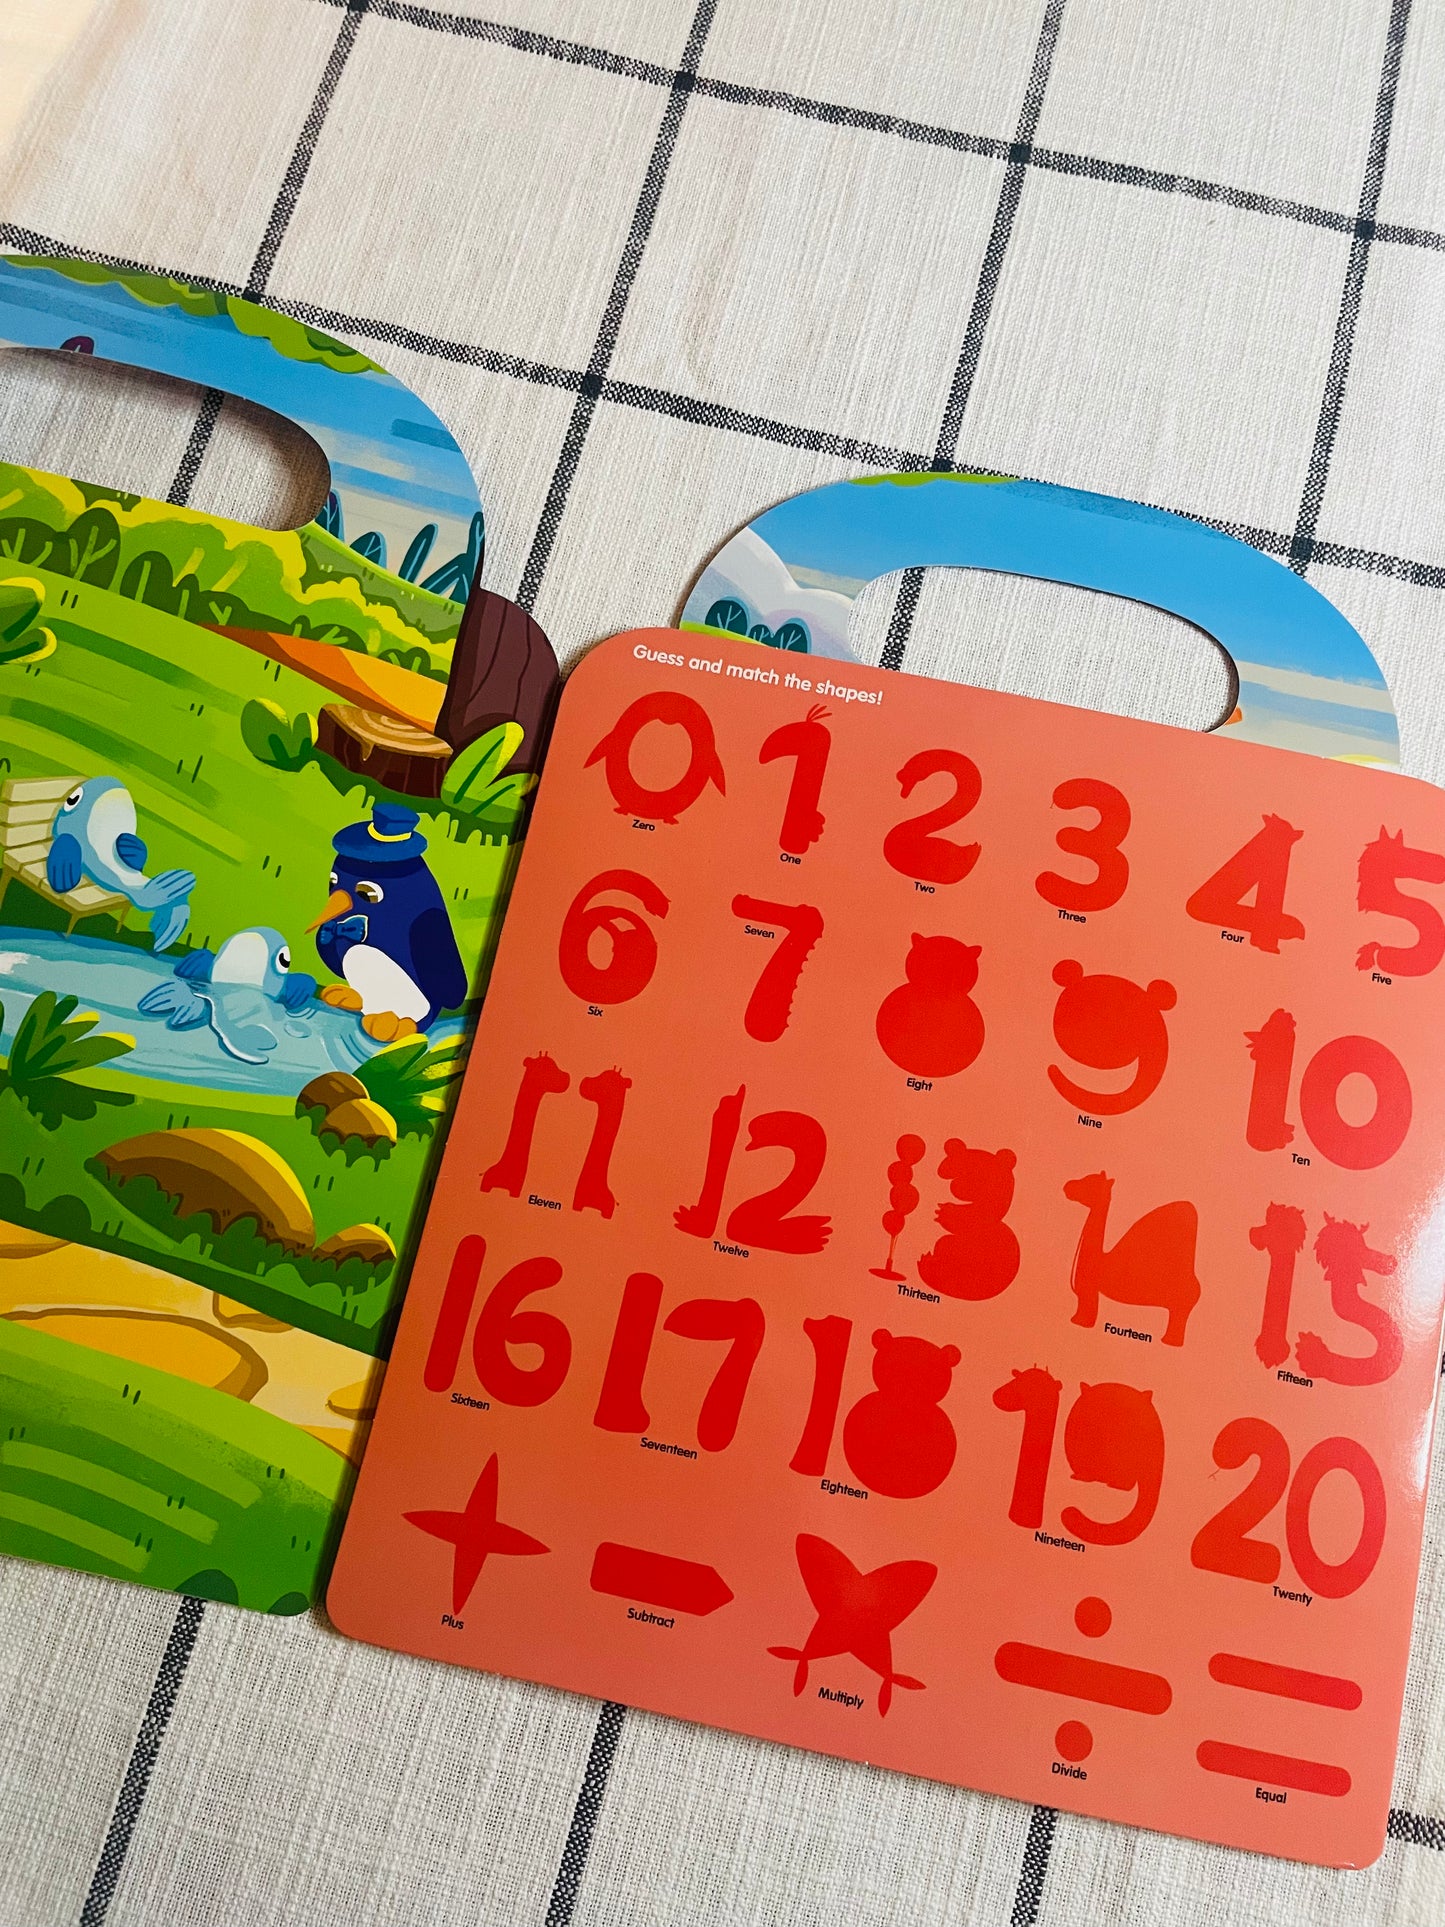 Re-useable Sticker Book | Numbers